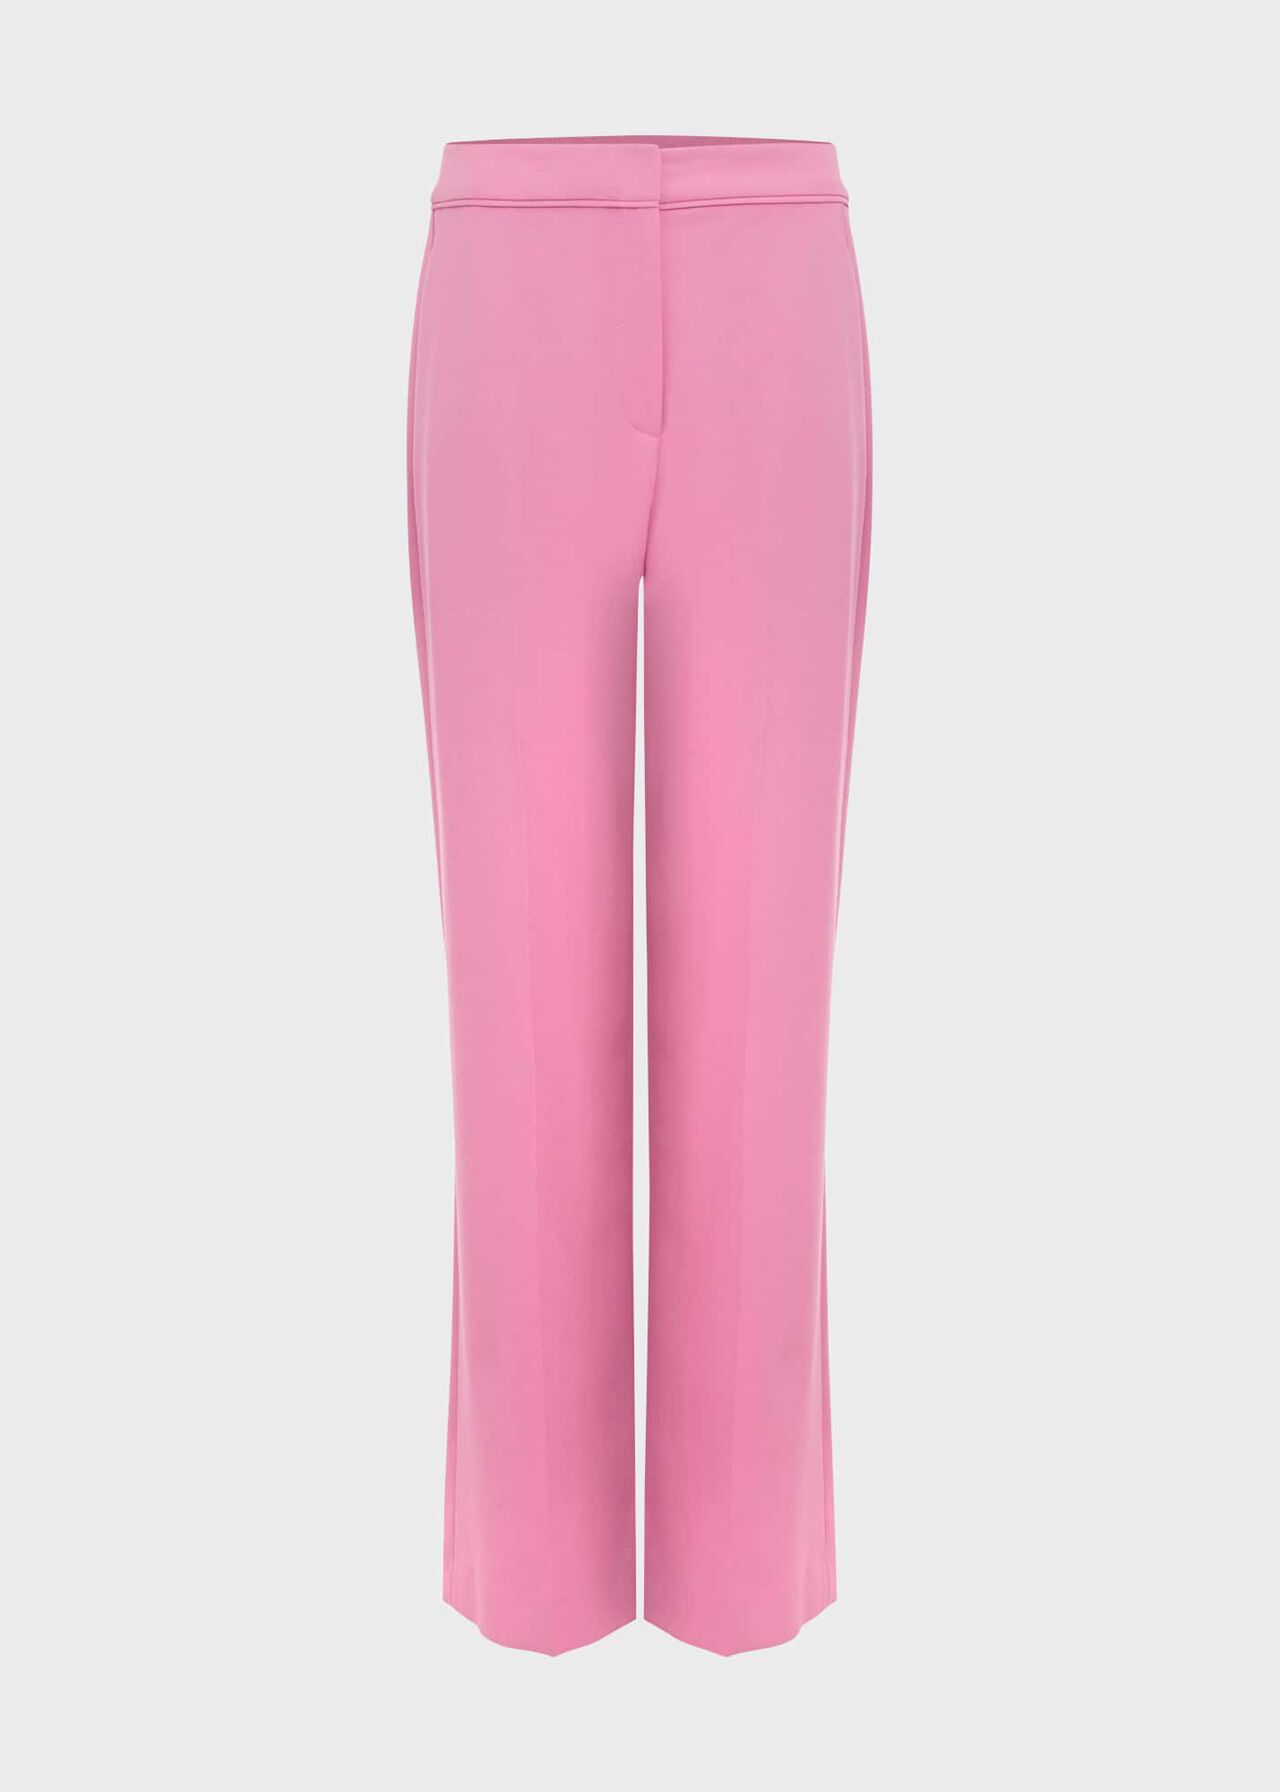 Felicity Wide Leg Trousers, Carnation Pink, hi-res